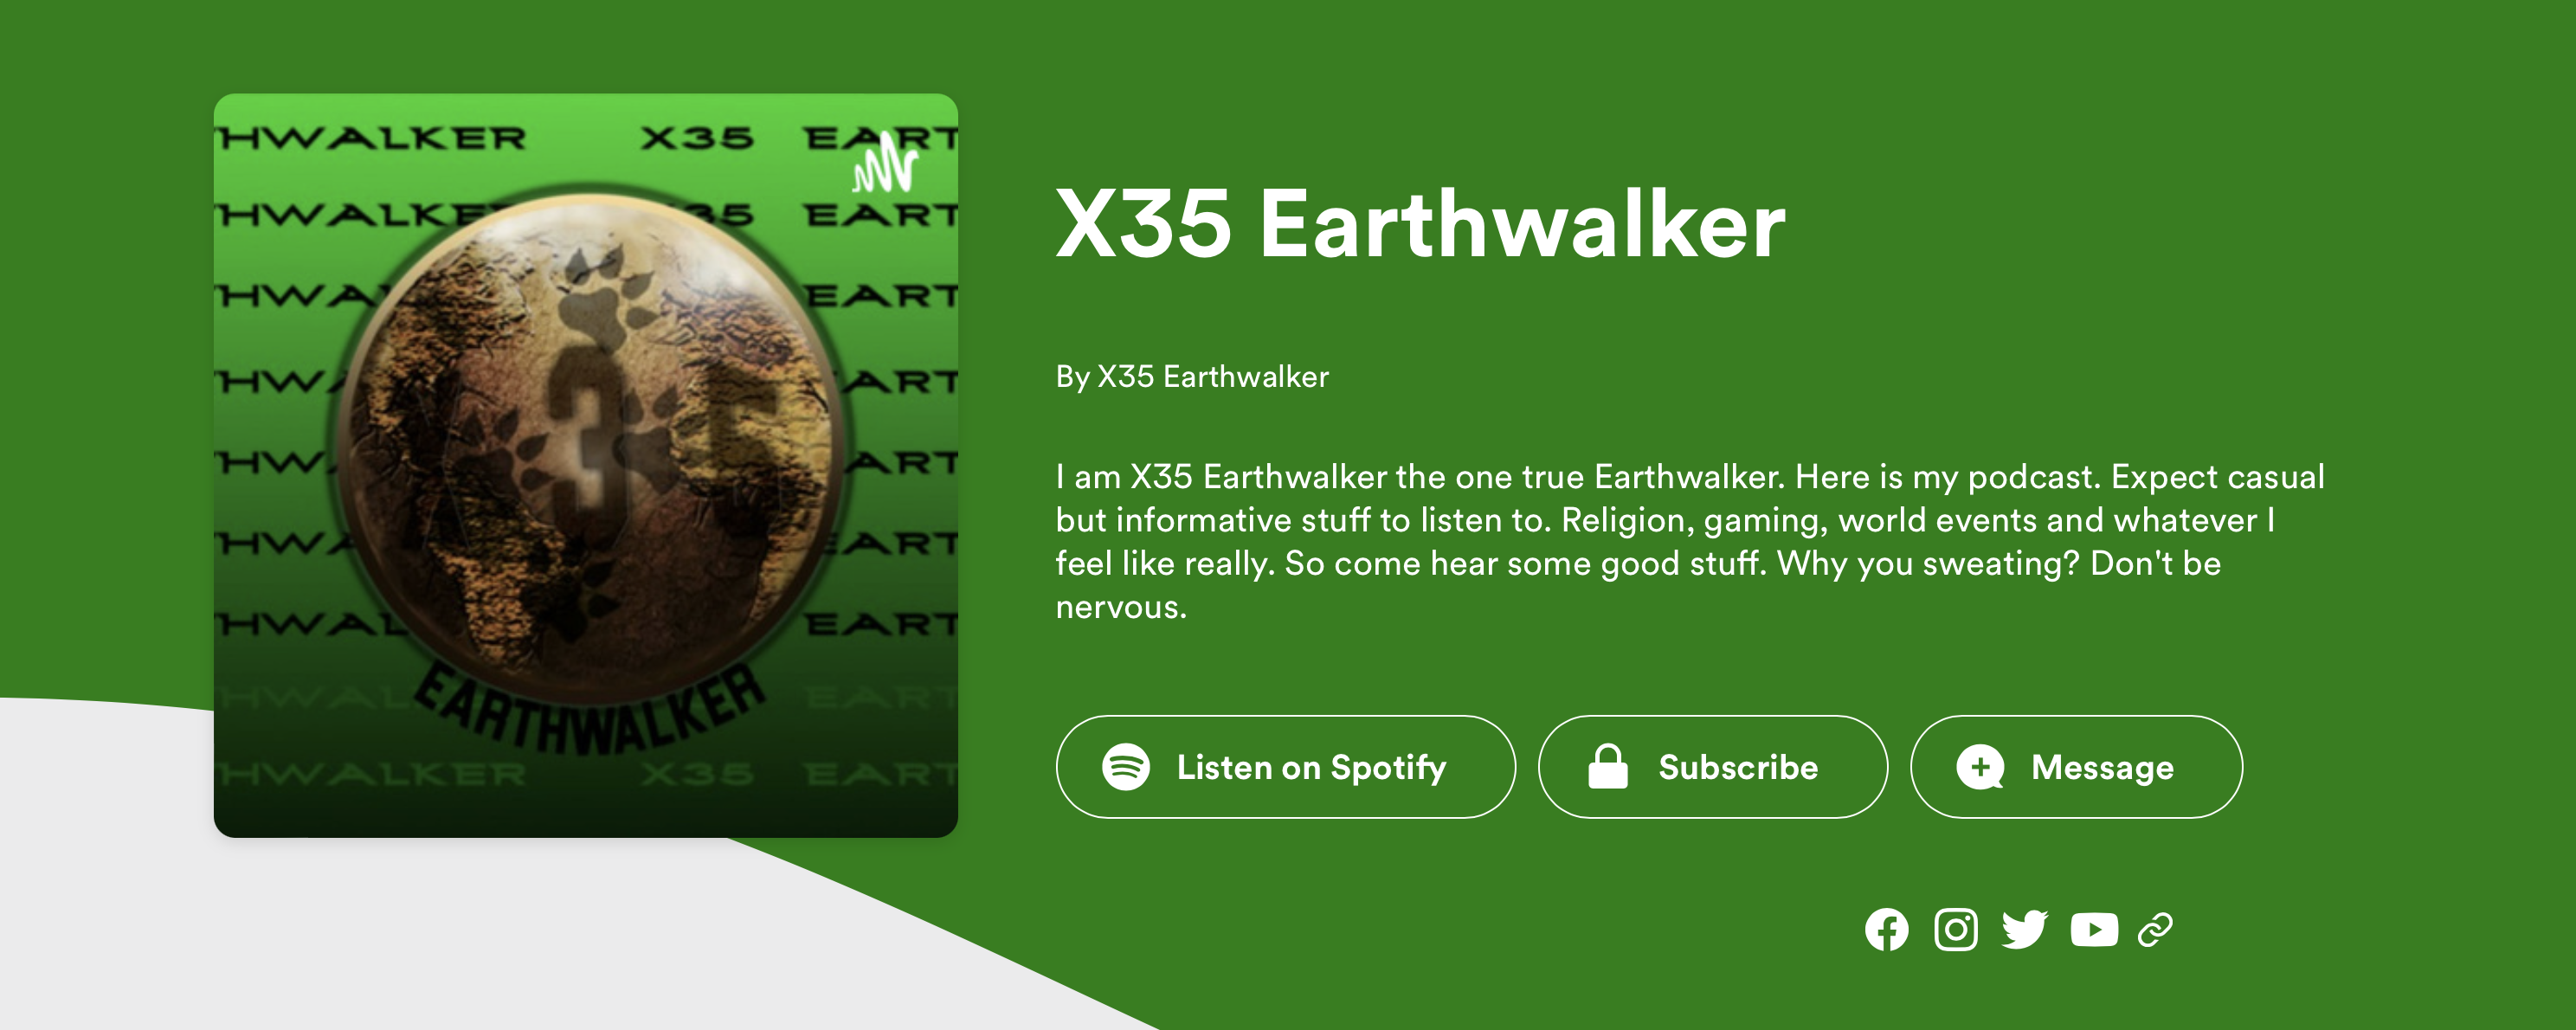 X35 Earthwalker Podcast Anchor and Spotify